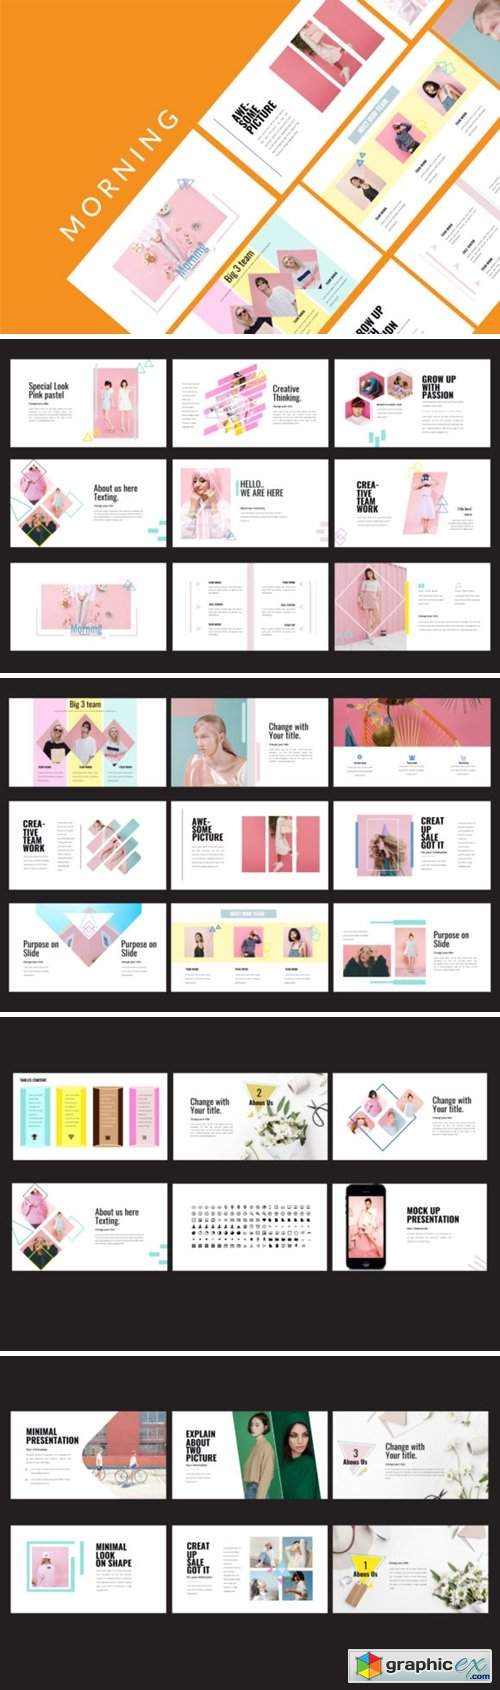  Fashion Morning - Powerpoint Template 